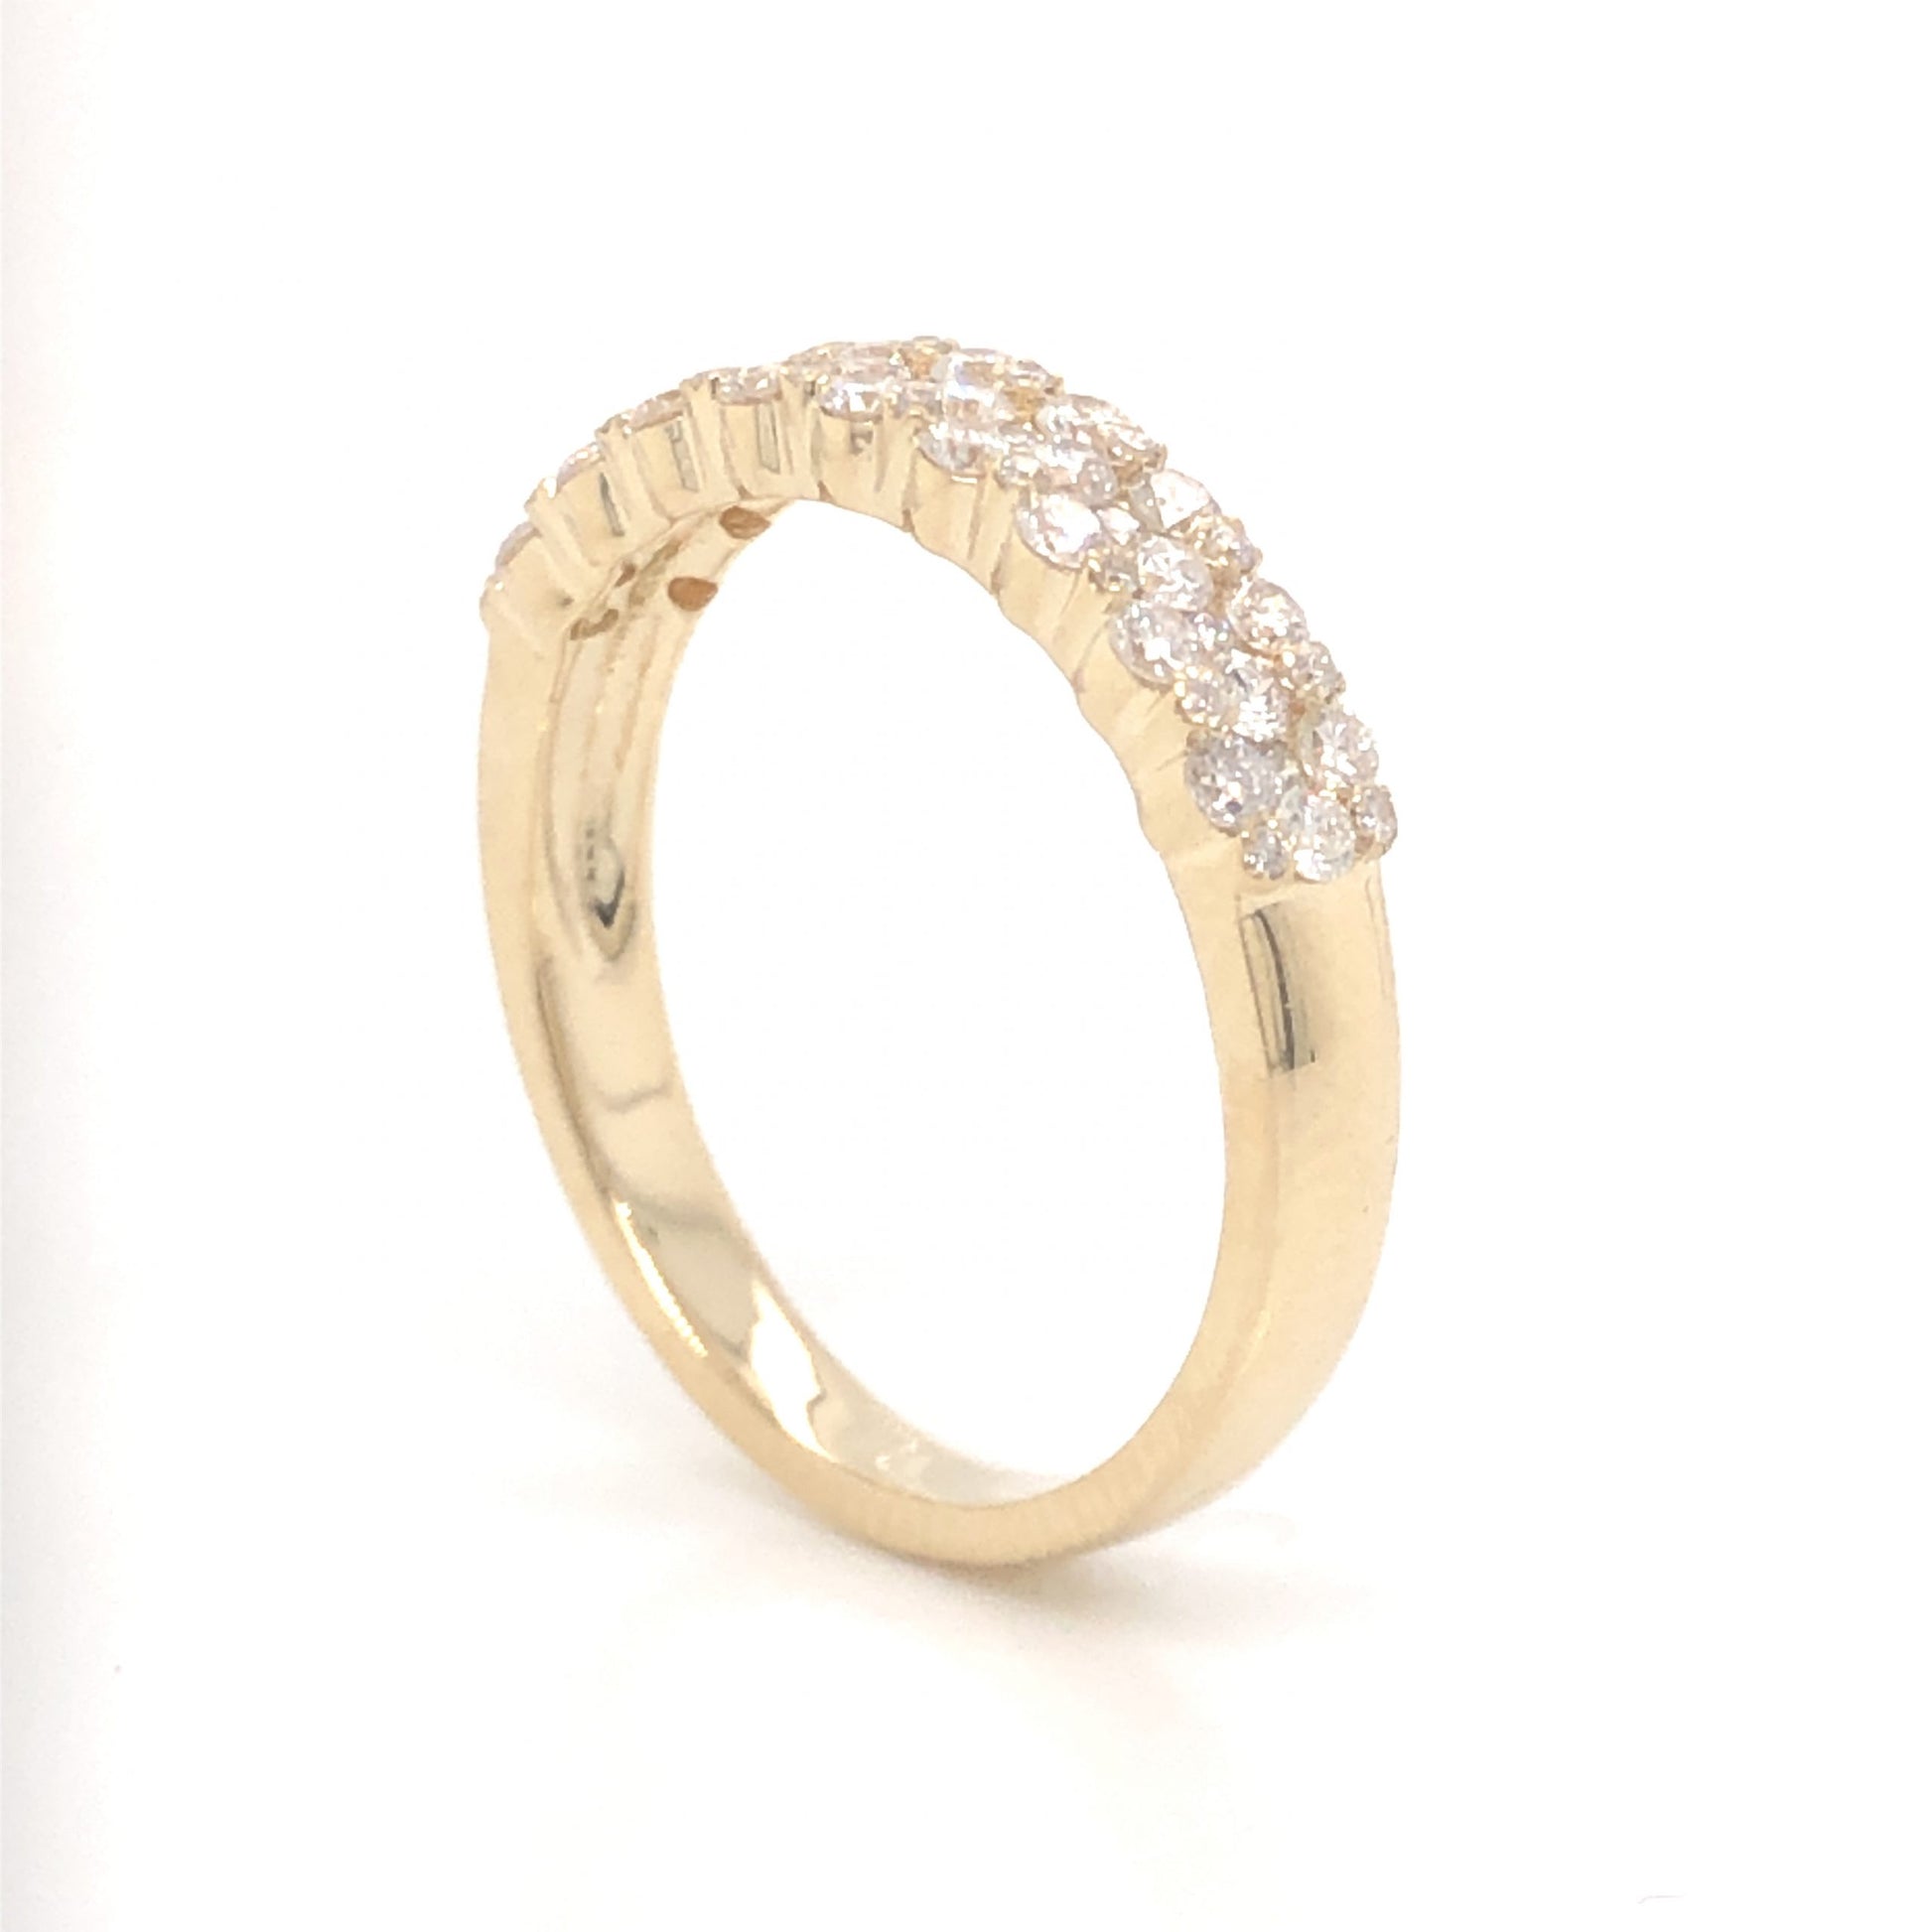 .60 Pave Diamond Wedding Band in 14k Yellow GoldComposition: 14 Karat Yellow GoldRing Size: 6.5Total Diamond Weight: .60 ctTotal Gram Weight: 2.8 gInscription: 14k 